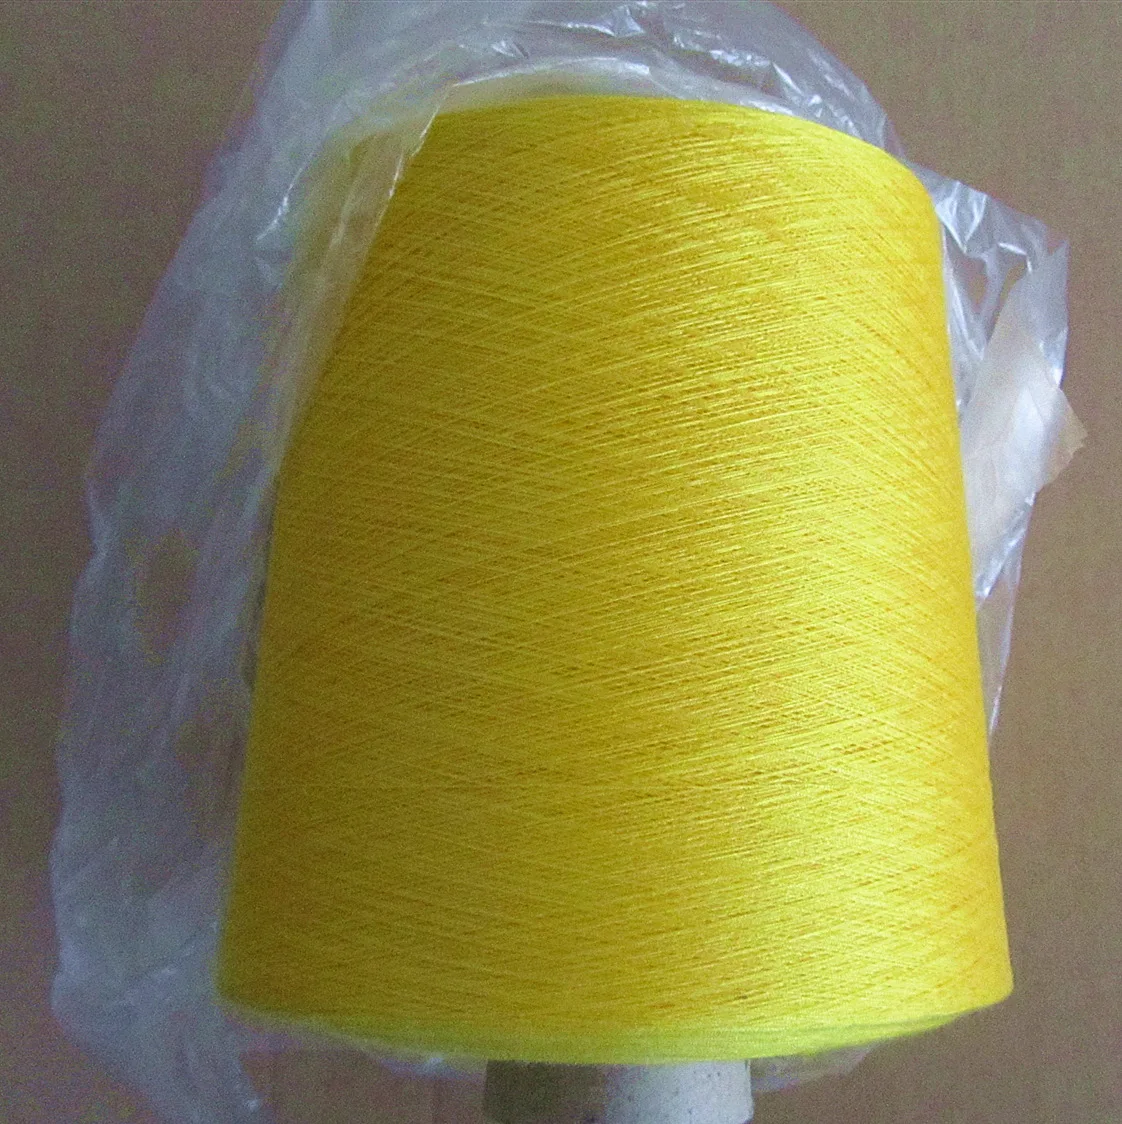 
hilo de coser 40s/2 polyester sewing thread 1kg loose winding 